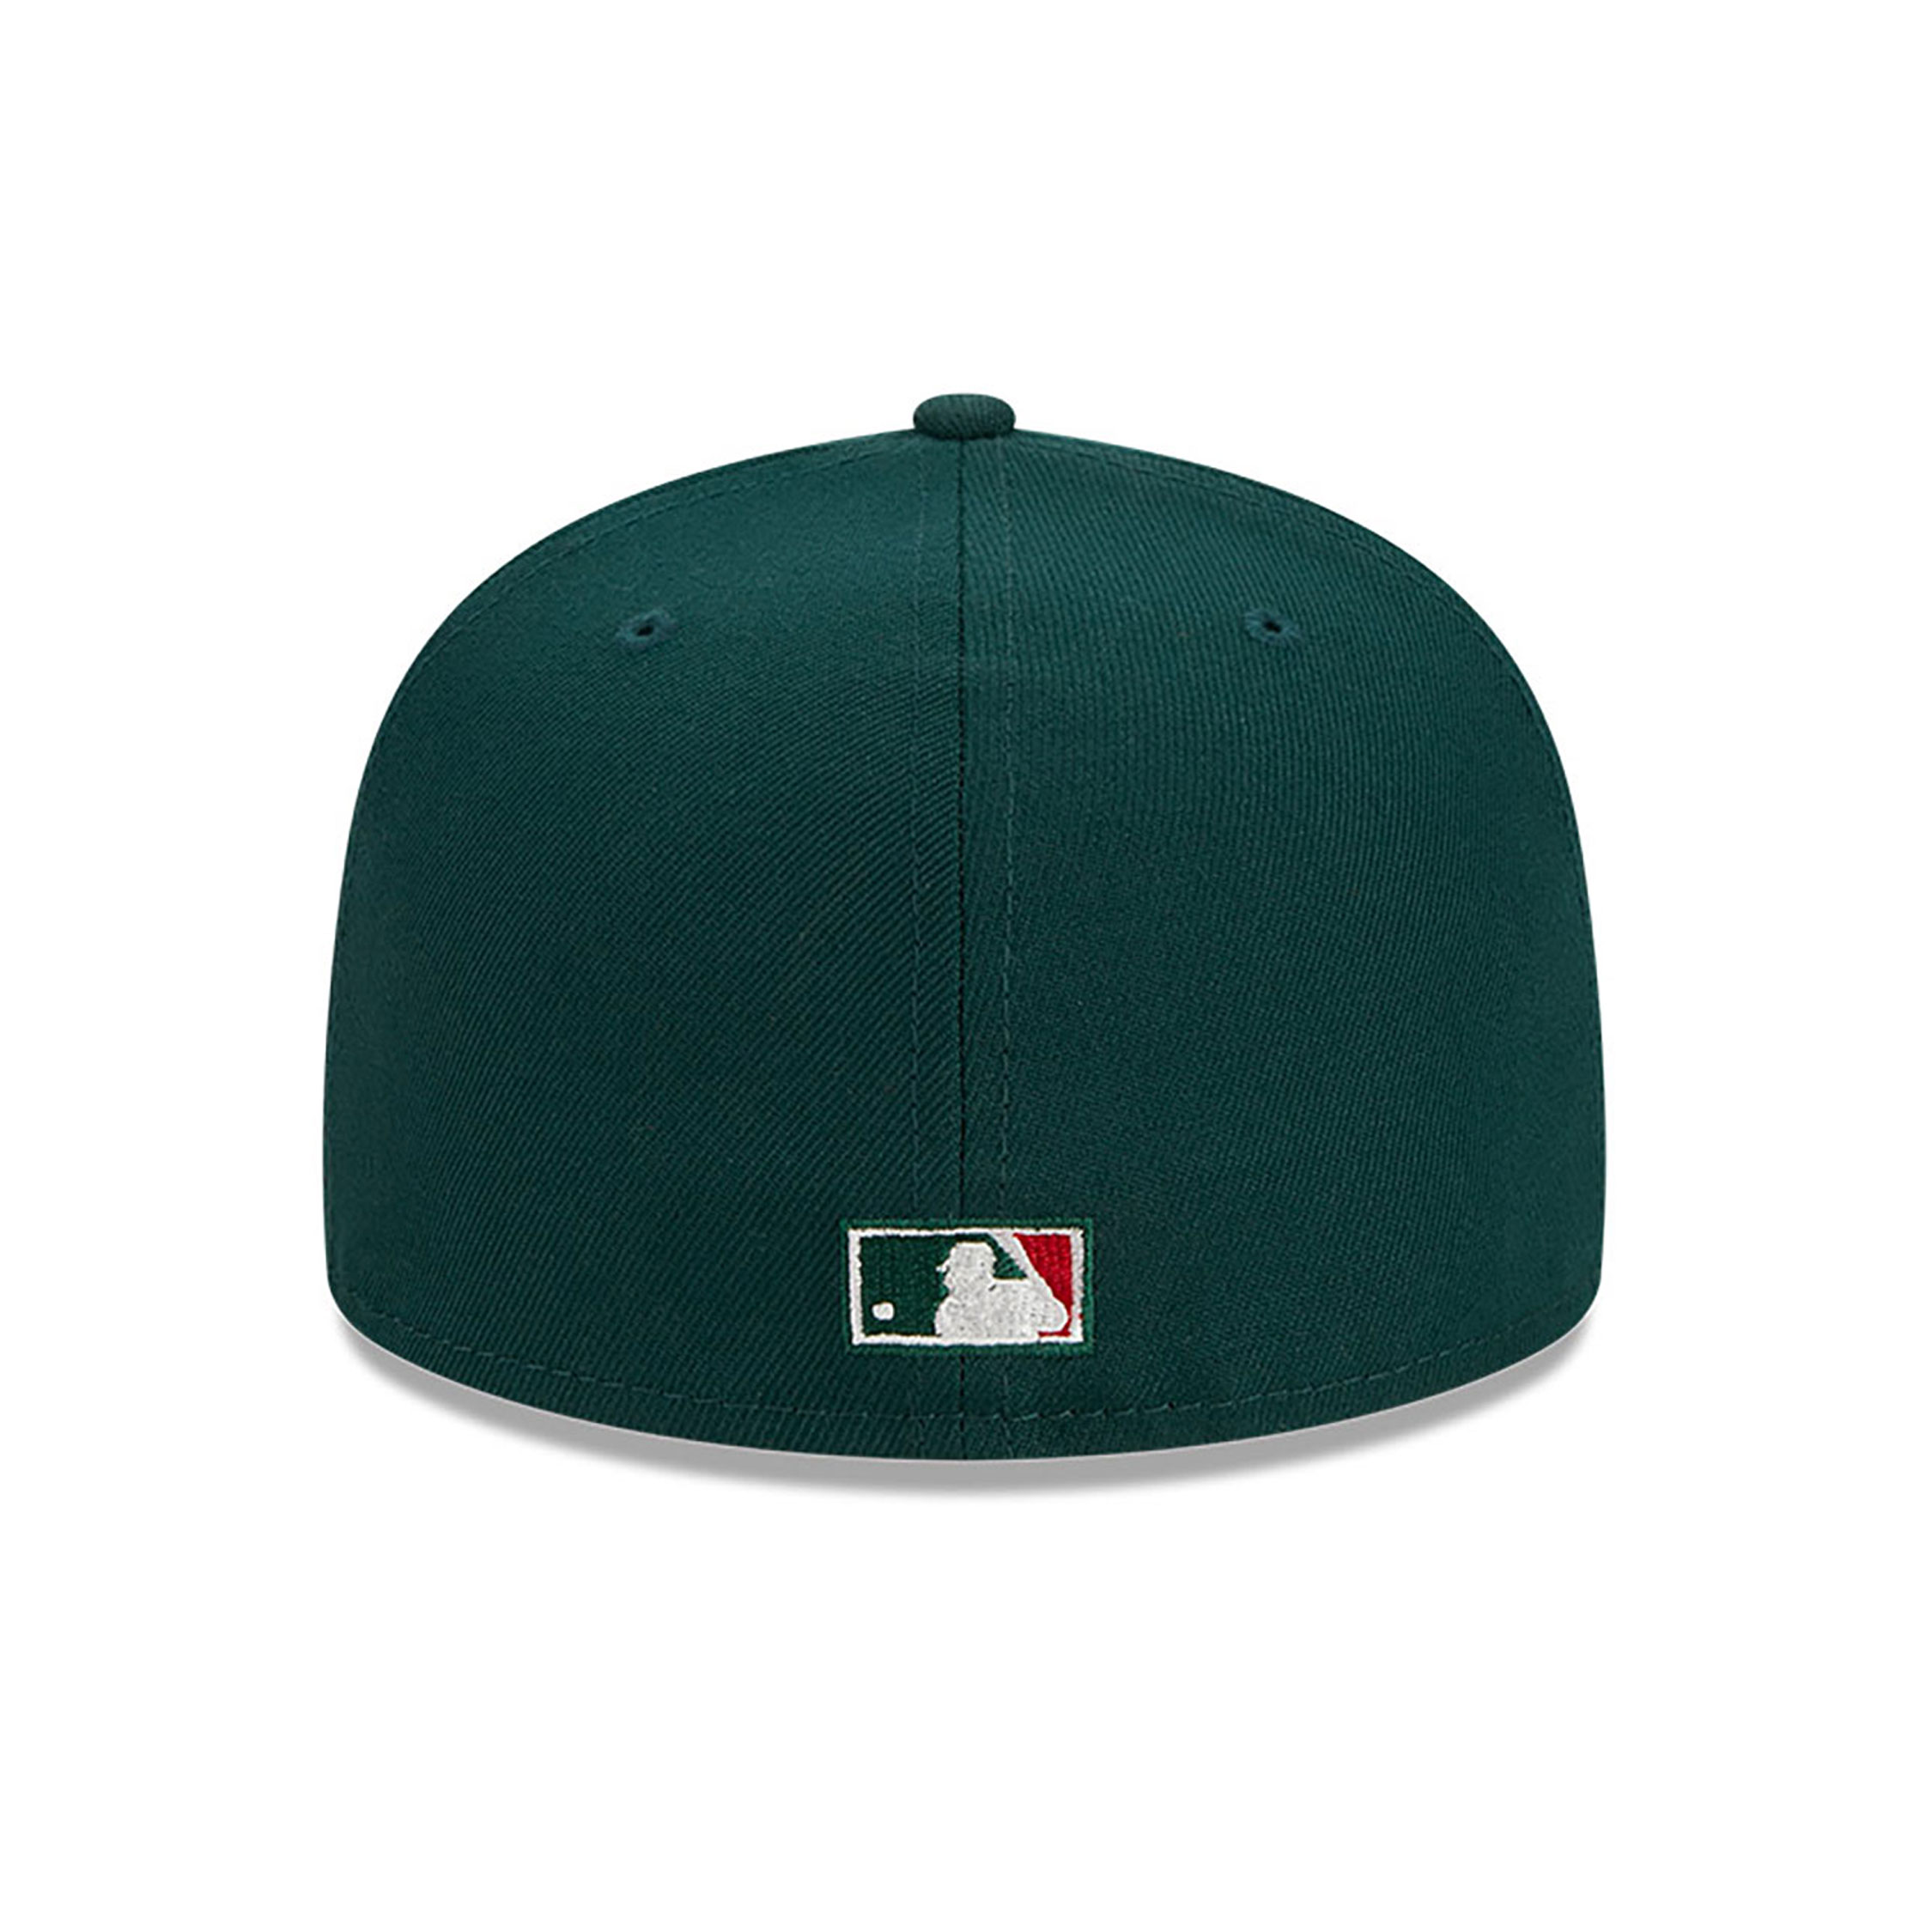 New York Yankees Spice Berry Dark Green 59FIFTY Fitted Cap